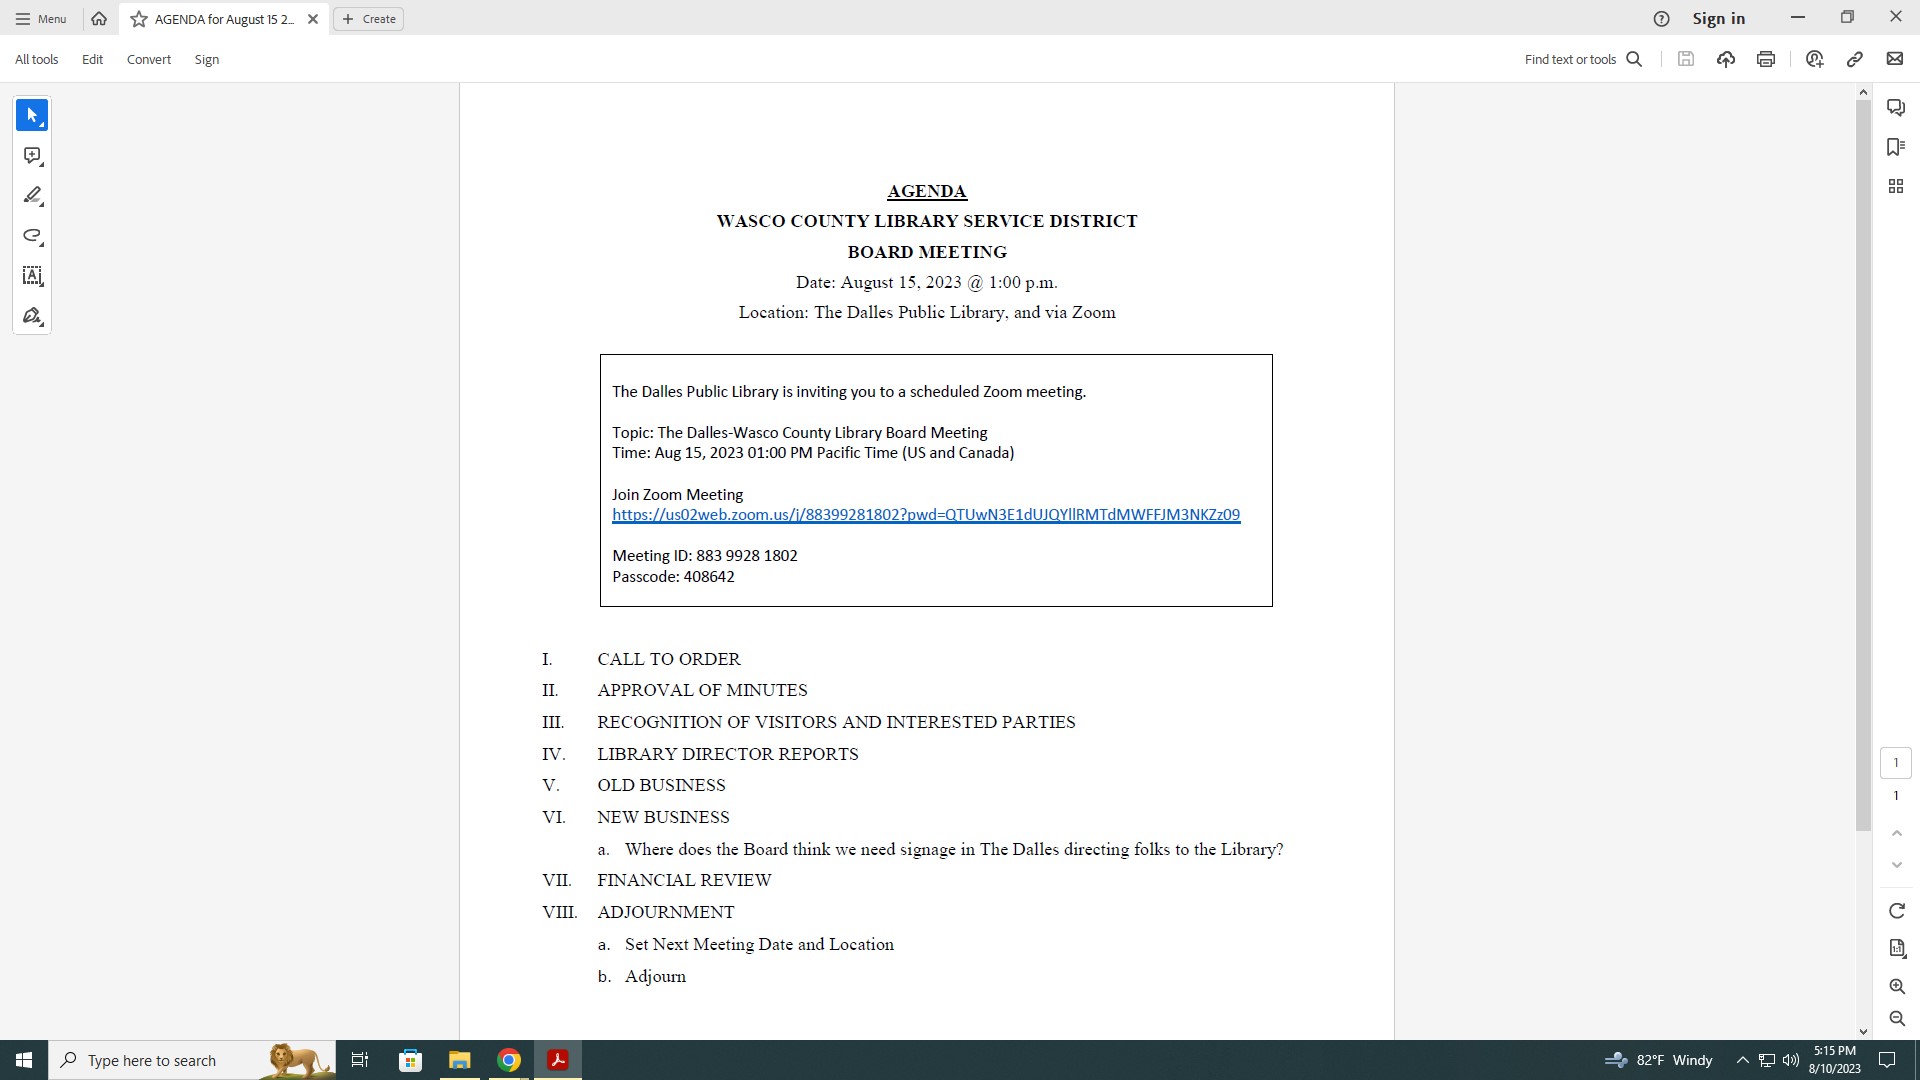 Agenda for Library Board meeting of August 15, 2023